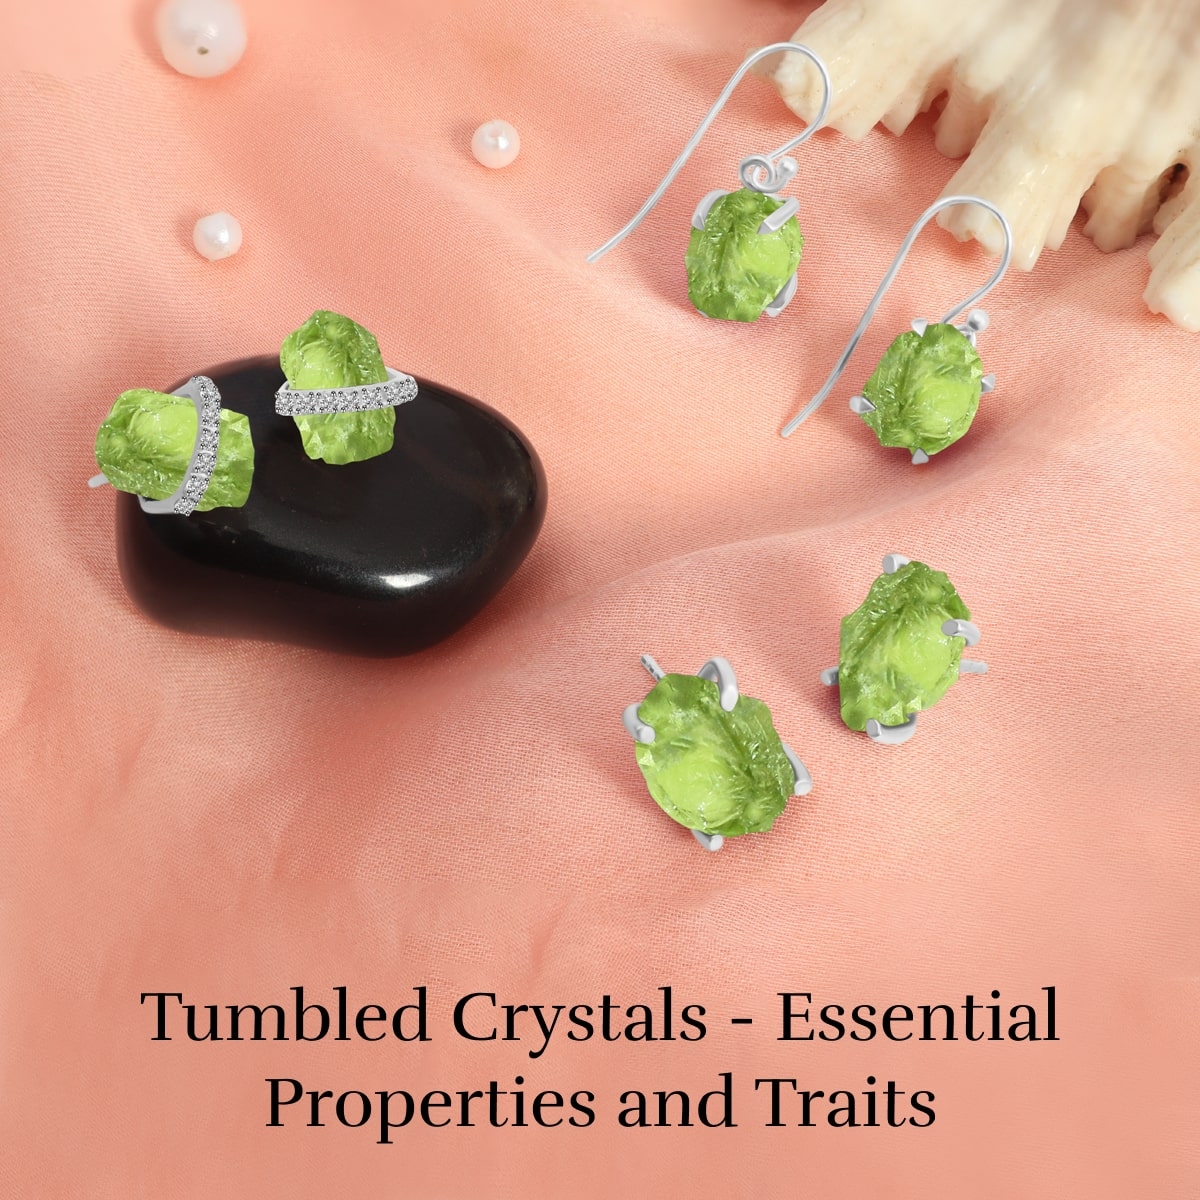 Properties and Characteristics of Tumbled Crystals